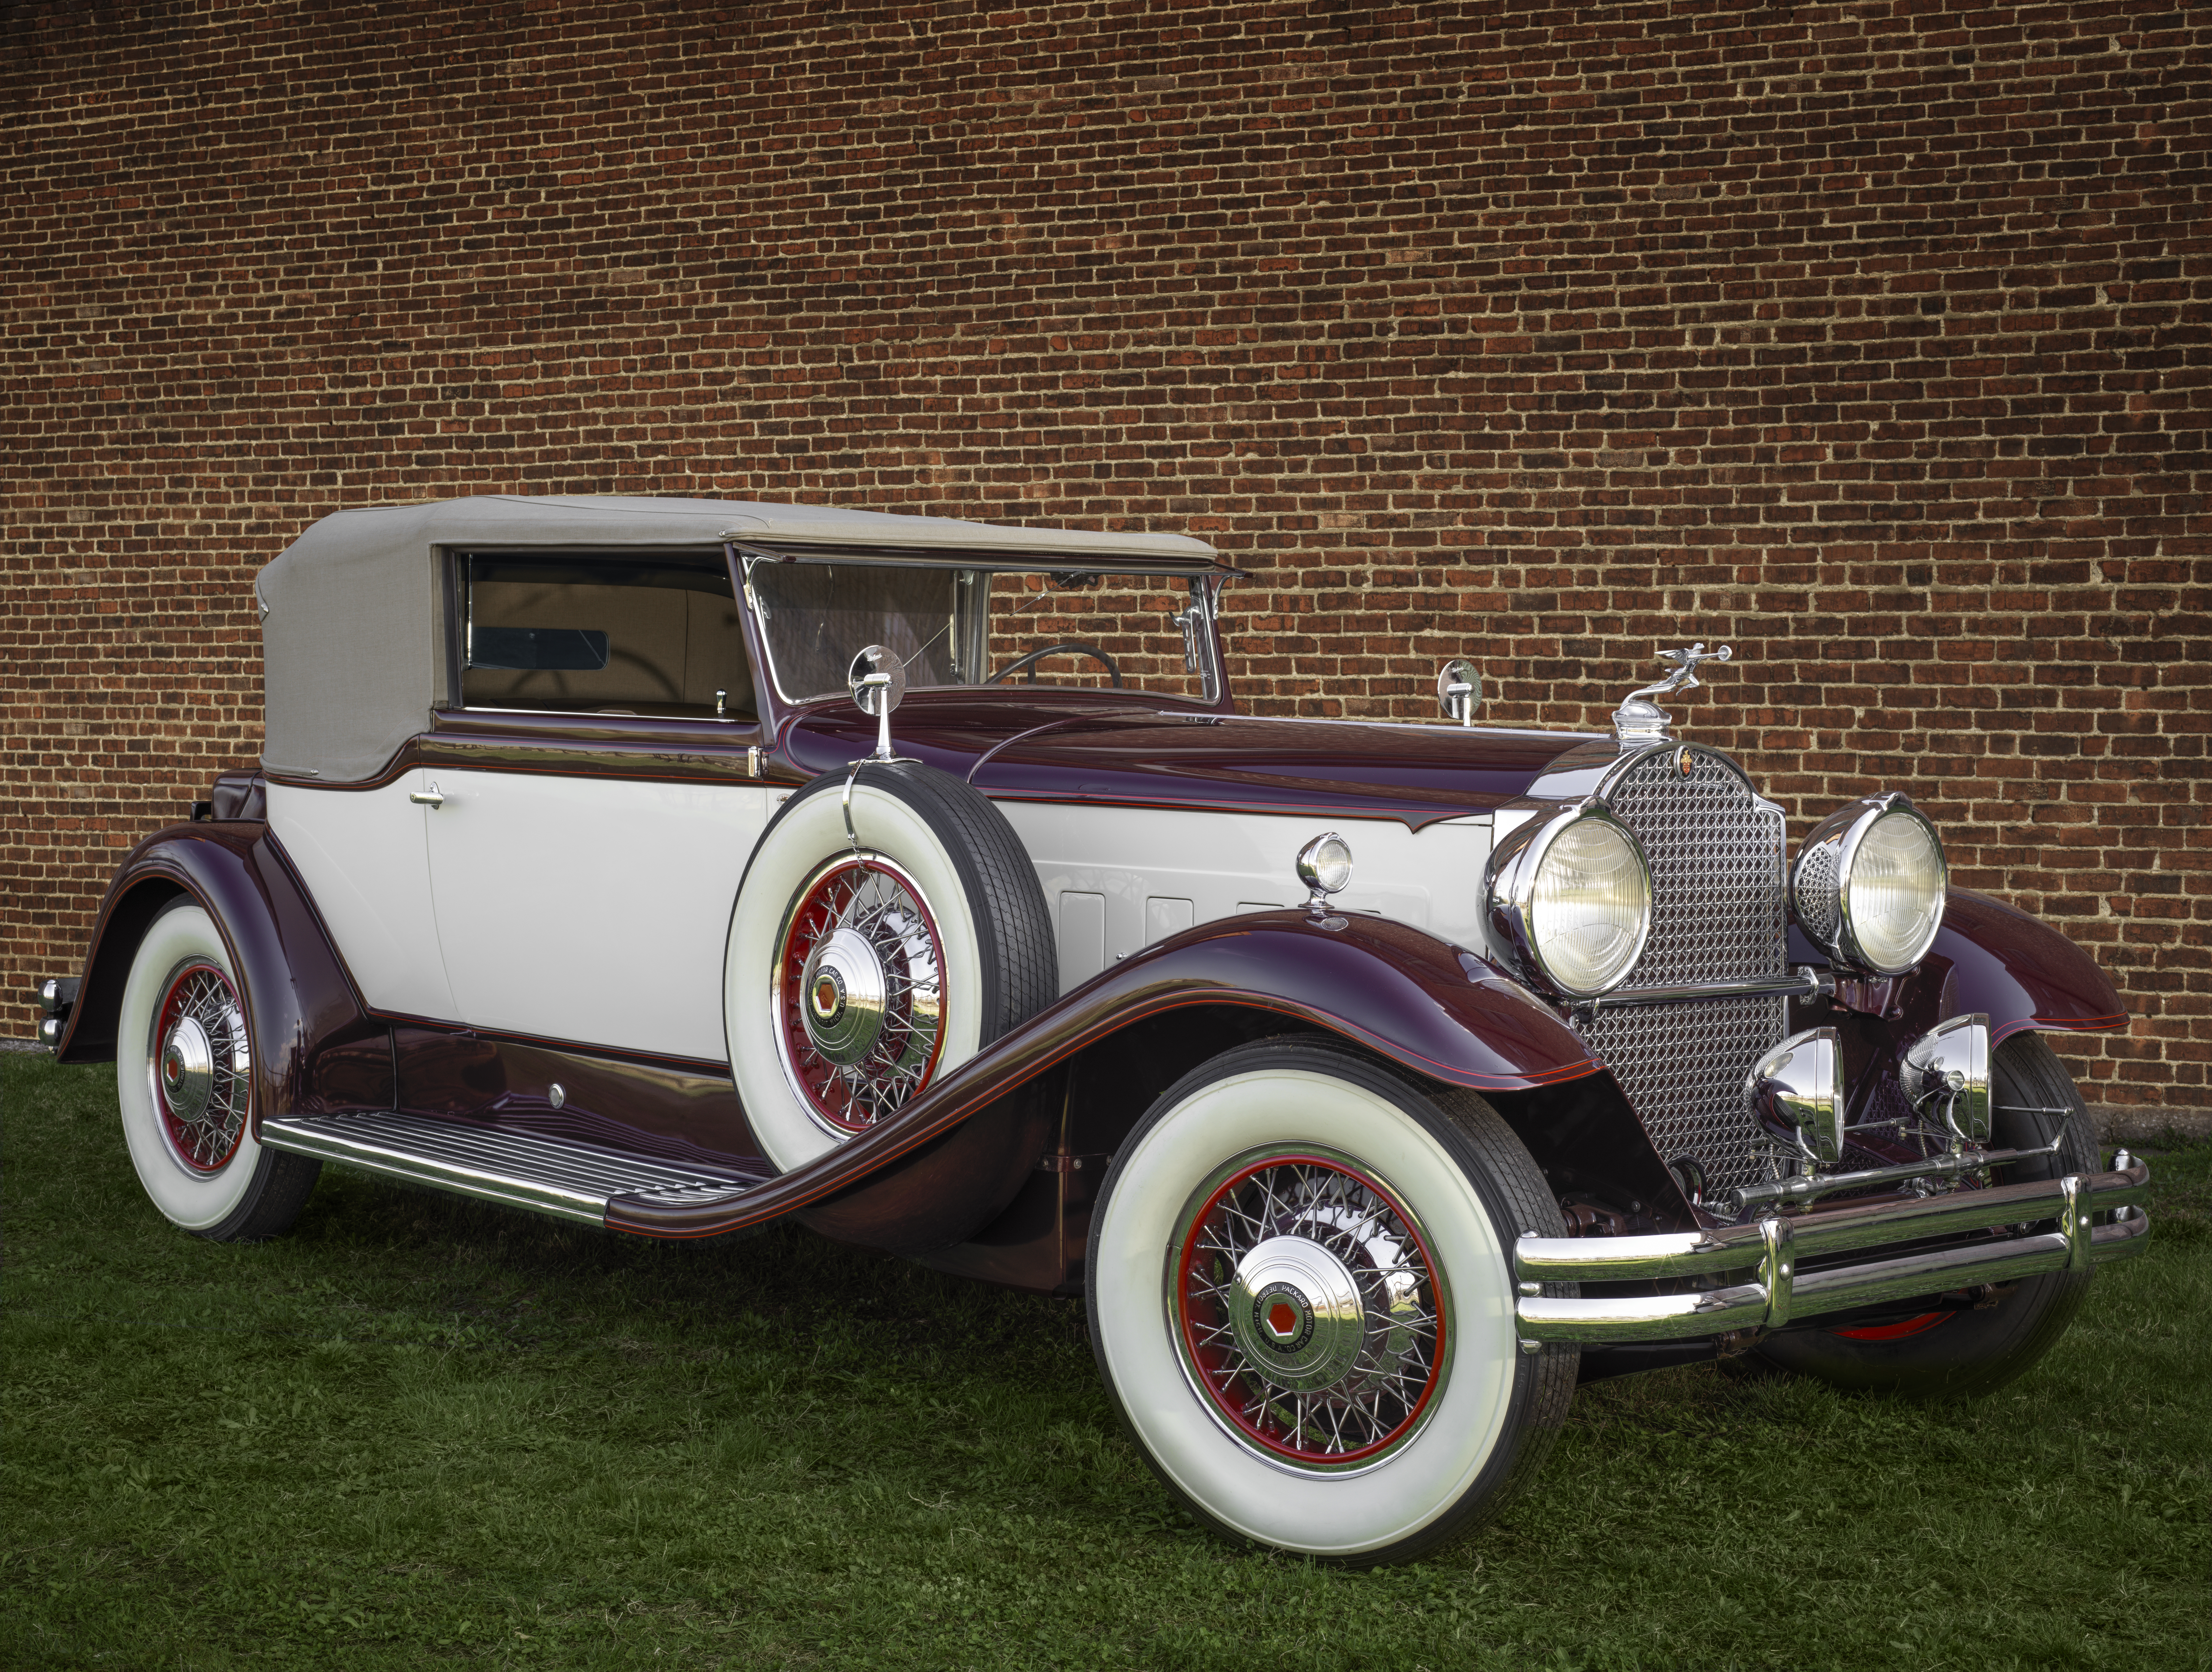 Packard Model 840 Dietrich Convertible Victoria, 1931. Body designed by Dietrich, Inc. Made by Packard, Motor Company, Detroit, Michigan 1899-1956. C. Richard & Evelyn Belger